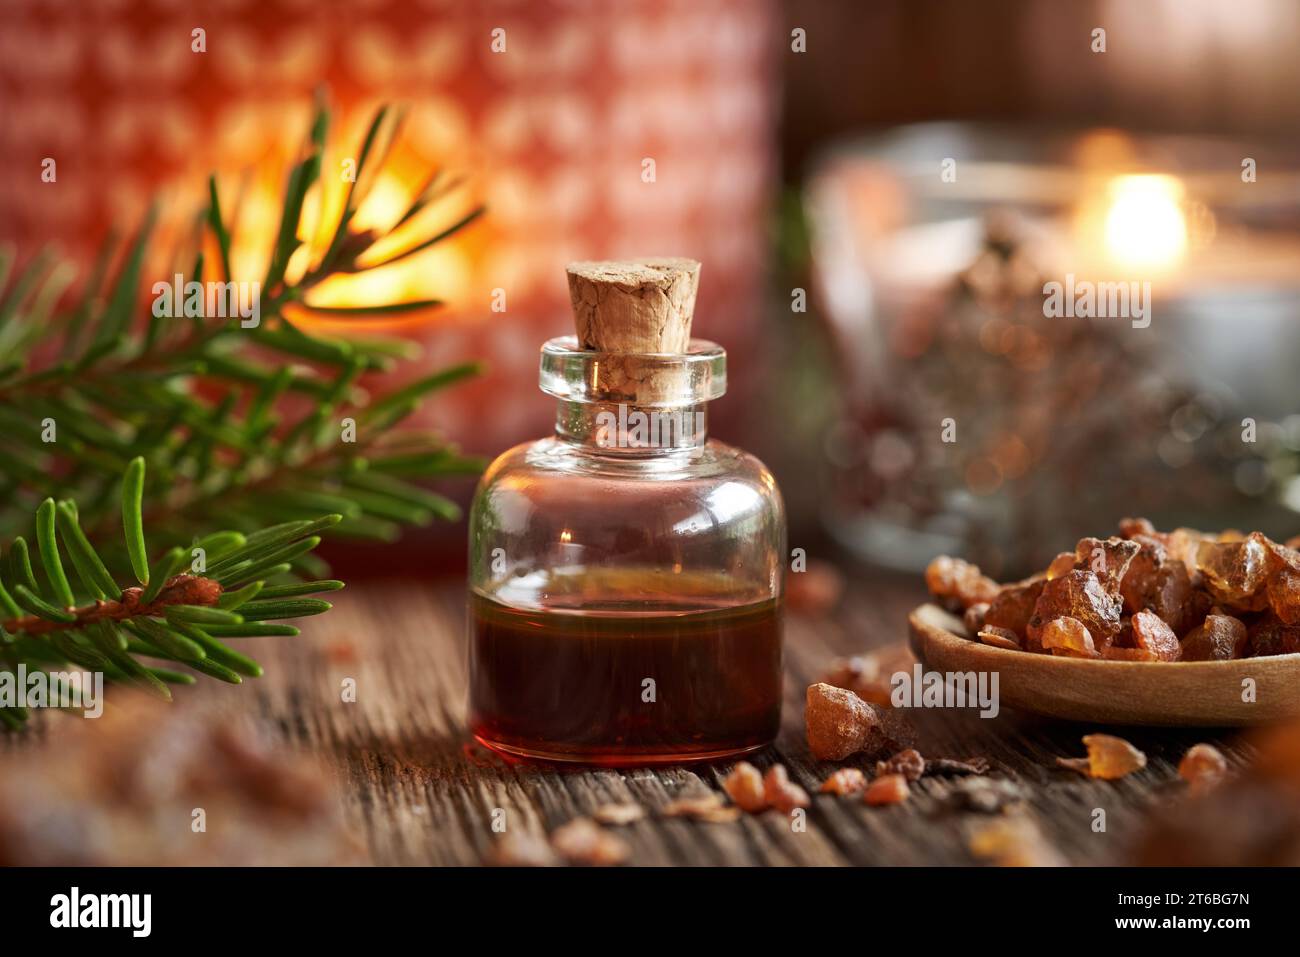 A bottle of myrrh essential oil with a candle and Christmas decoration Stock Photo